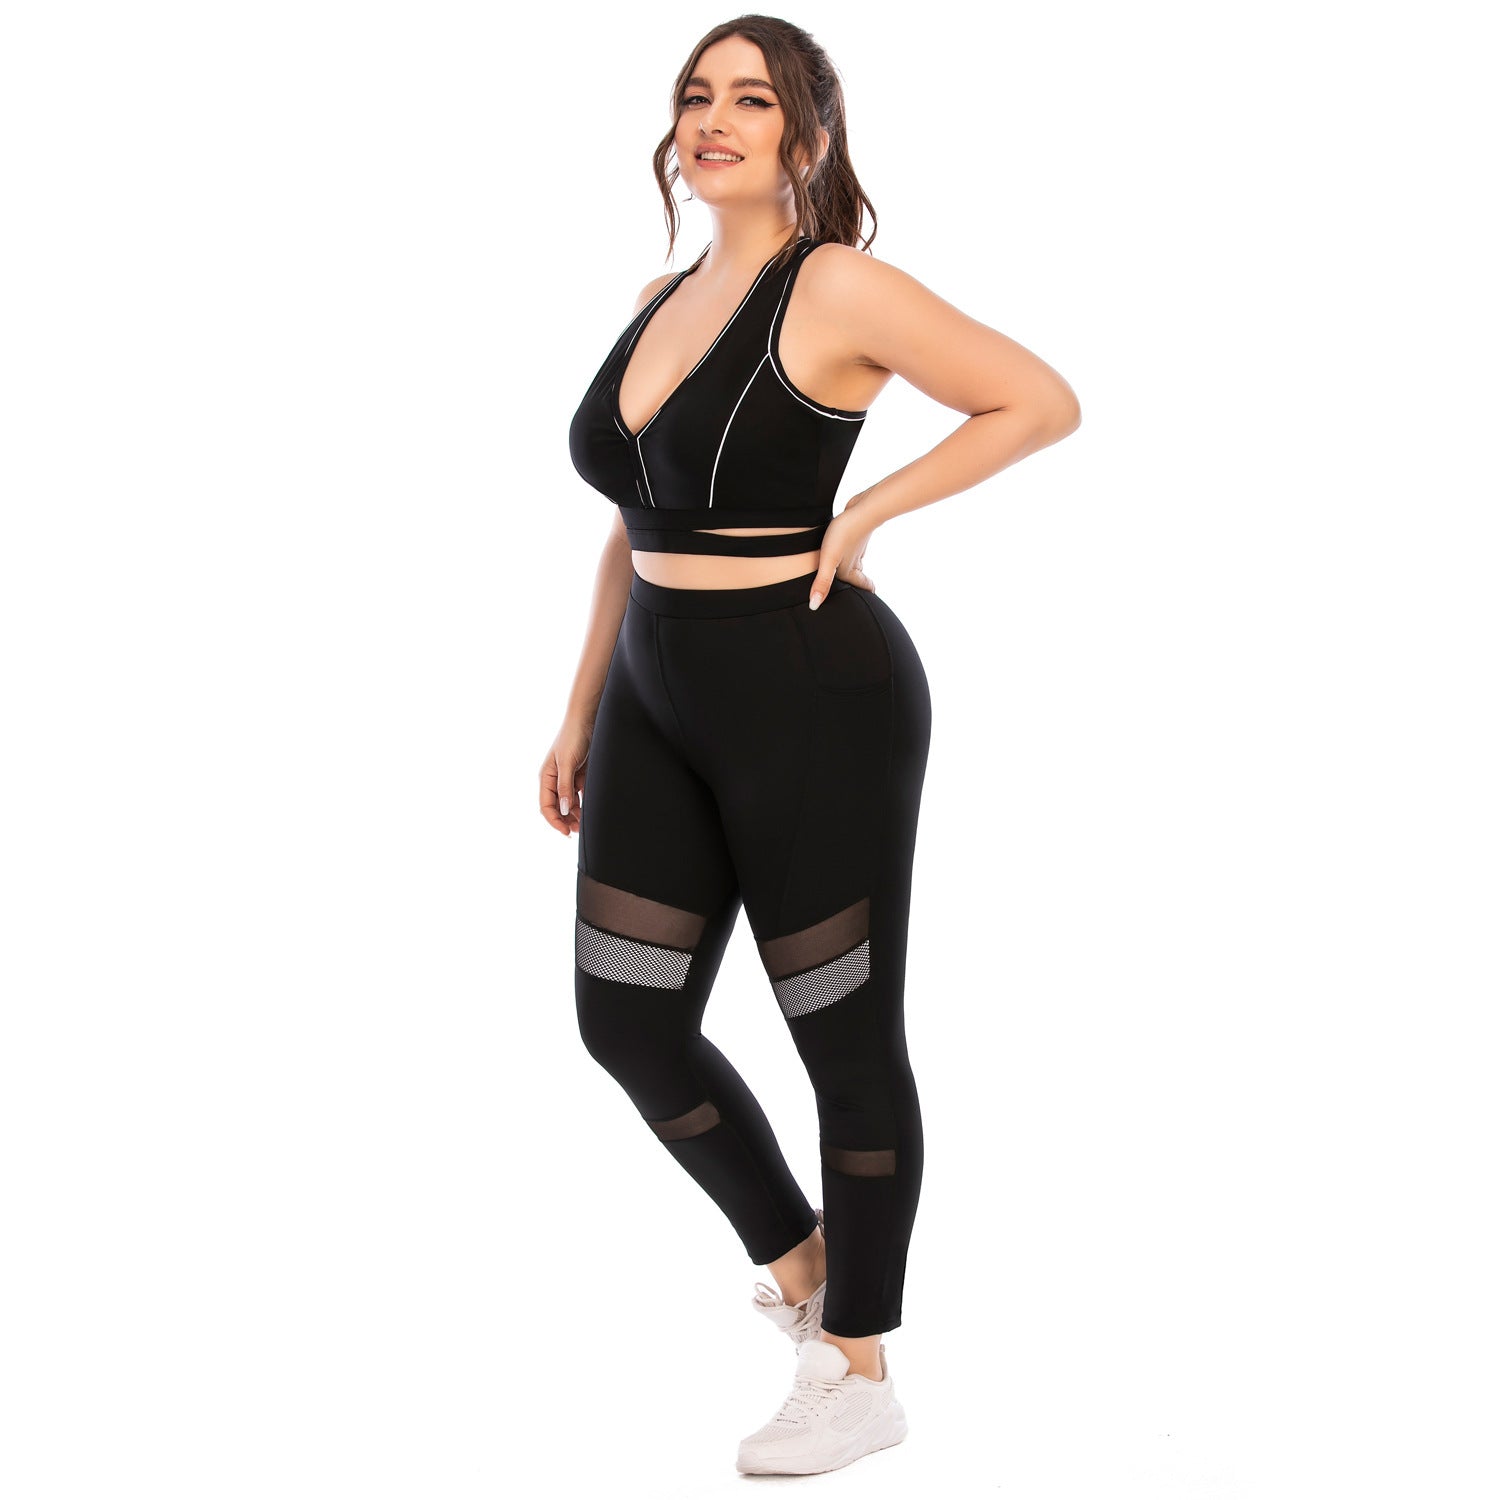 Workout Suits Plus Size Yoga Clothes - High Impact Coffee